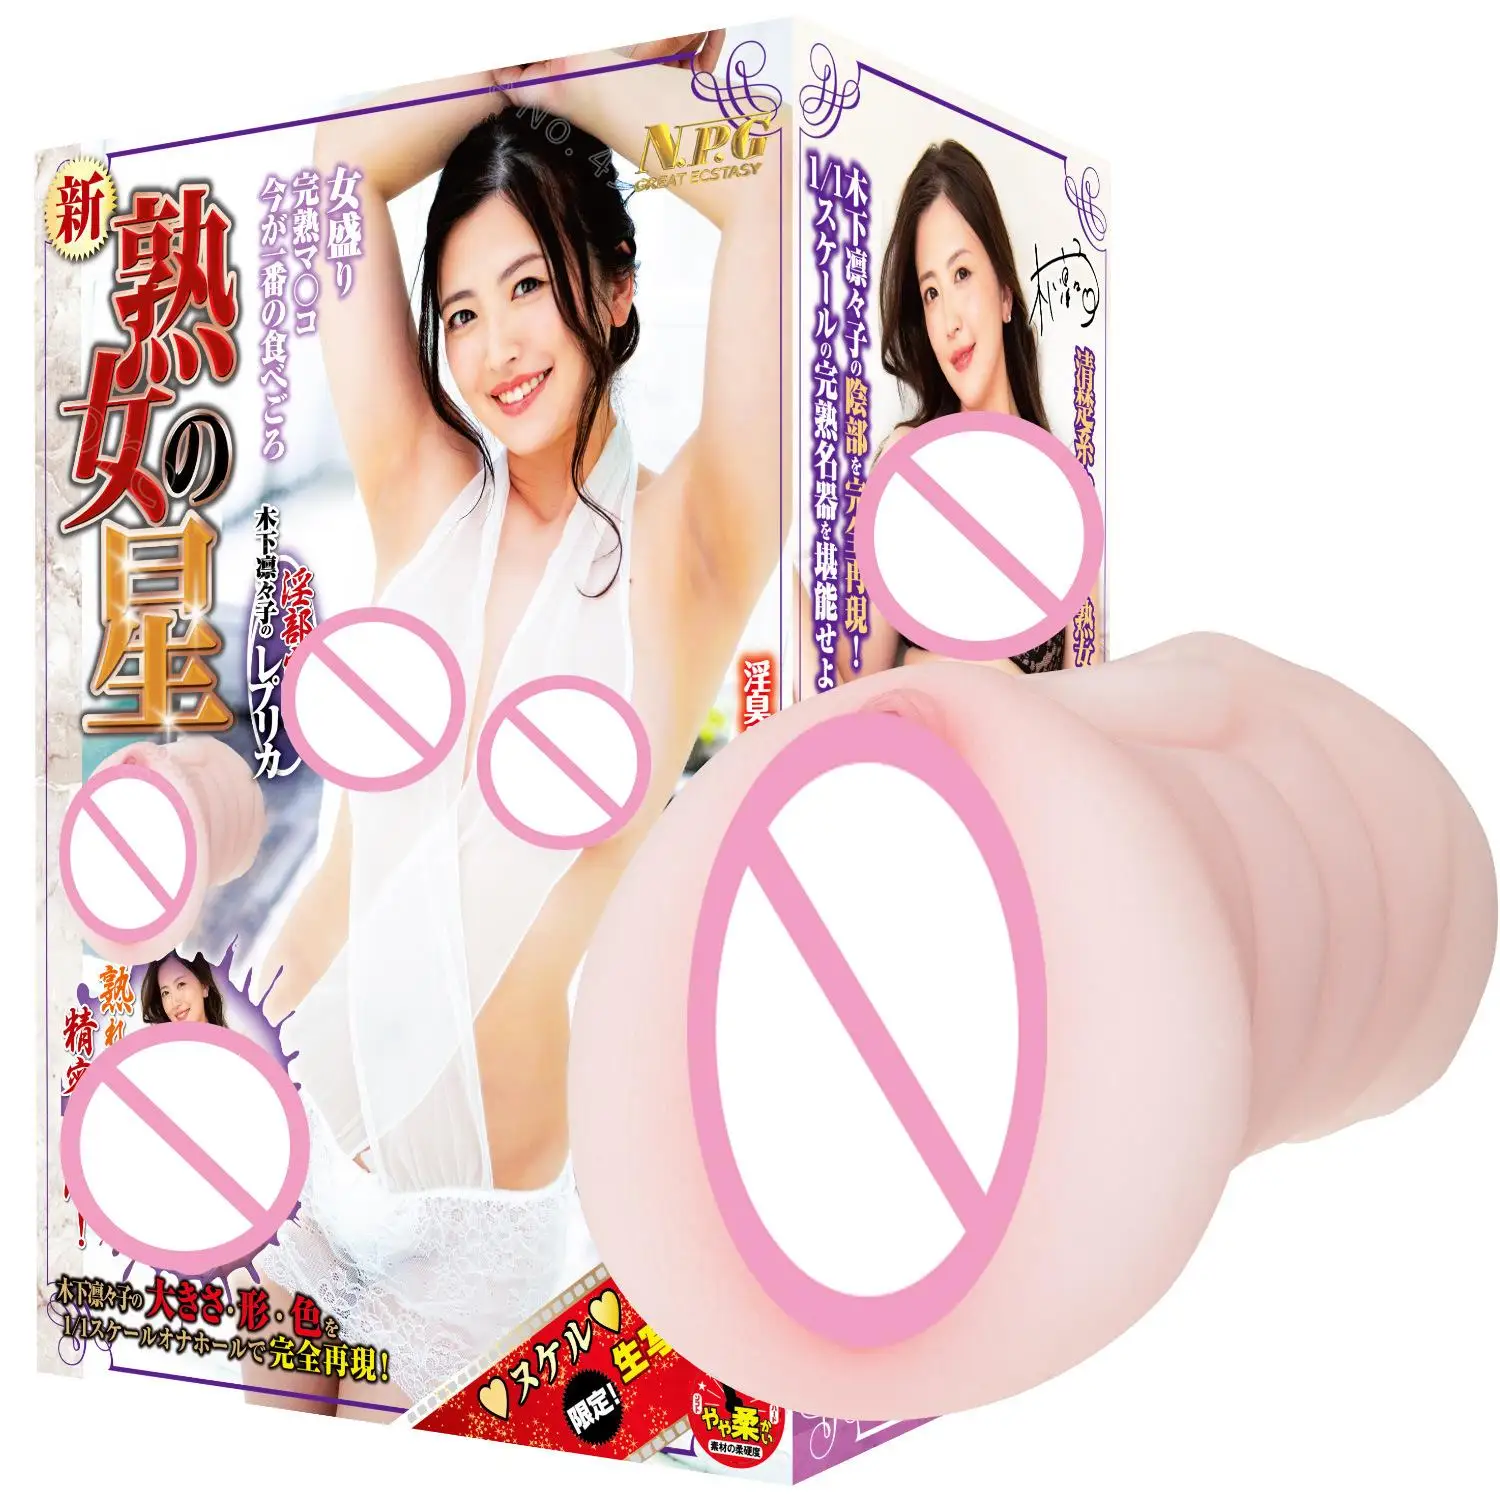 

Japan AV Star Realistic Pocket Pussy Sex Toys for Man Sex machine Imported Artificial Vagina for Men Silicone Male Masturbators